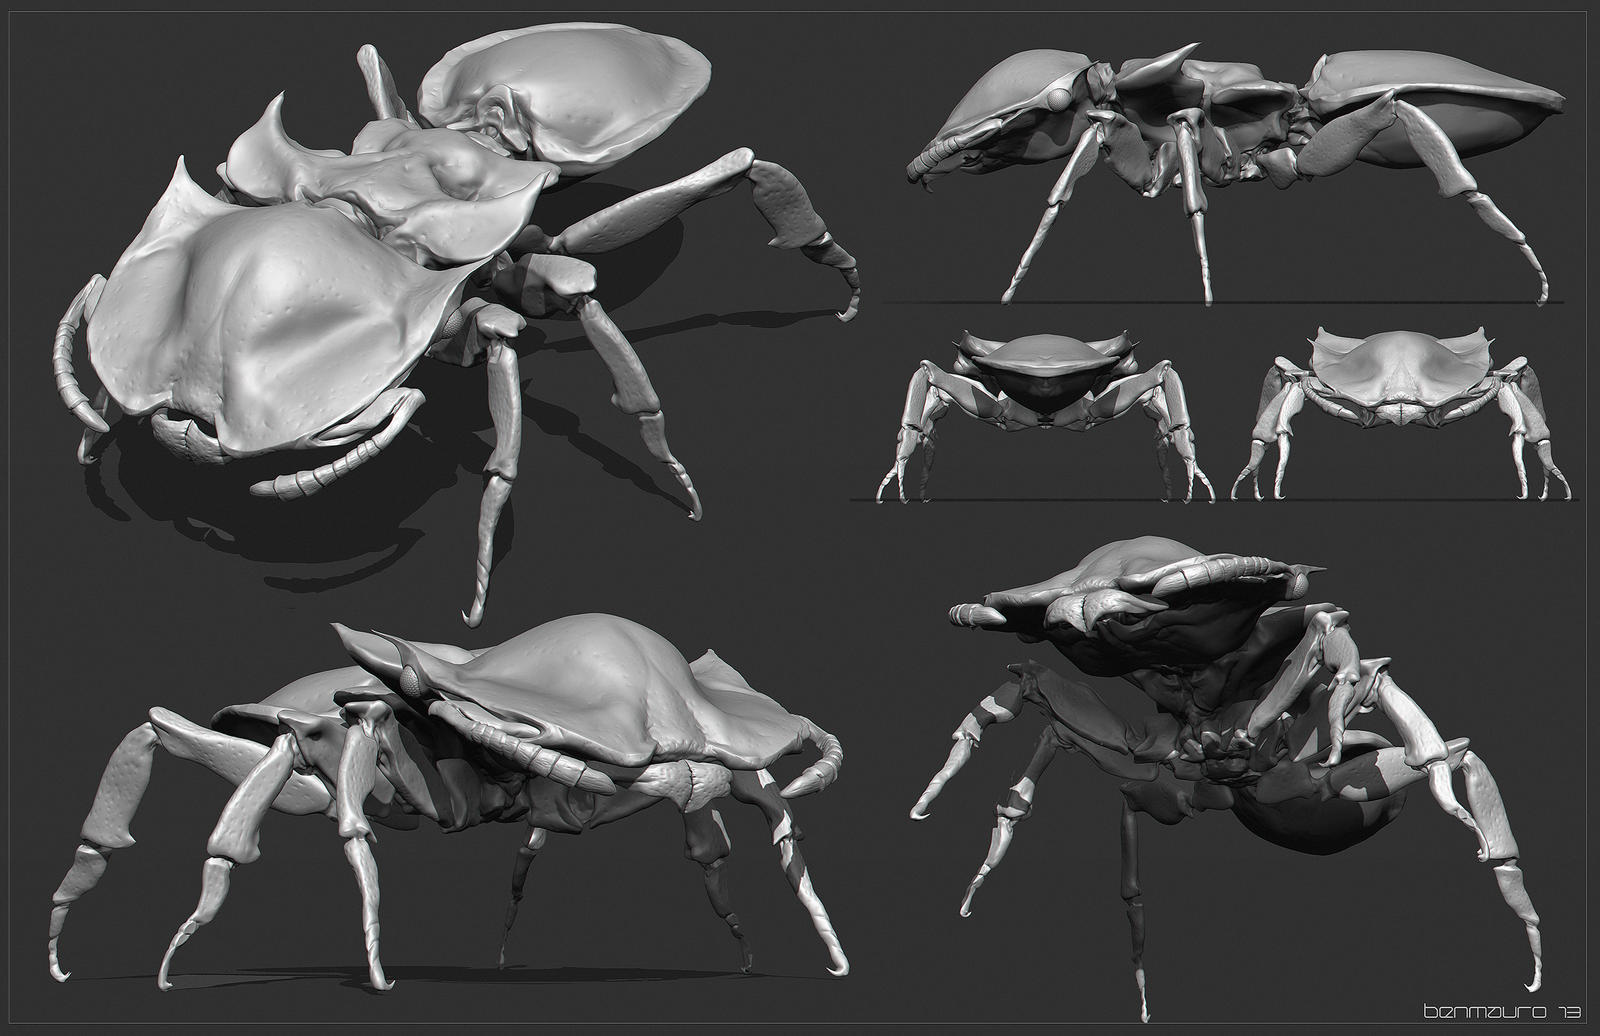 warmup___golden_turtle_ant_study__by_benmauro-d6a677j.jpg